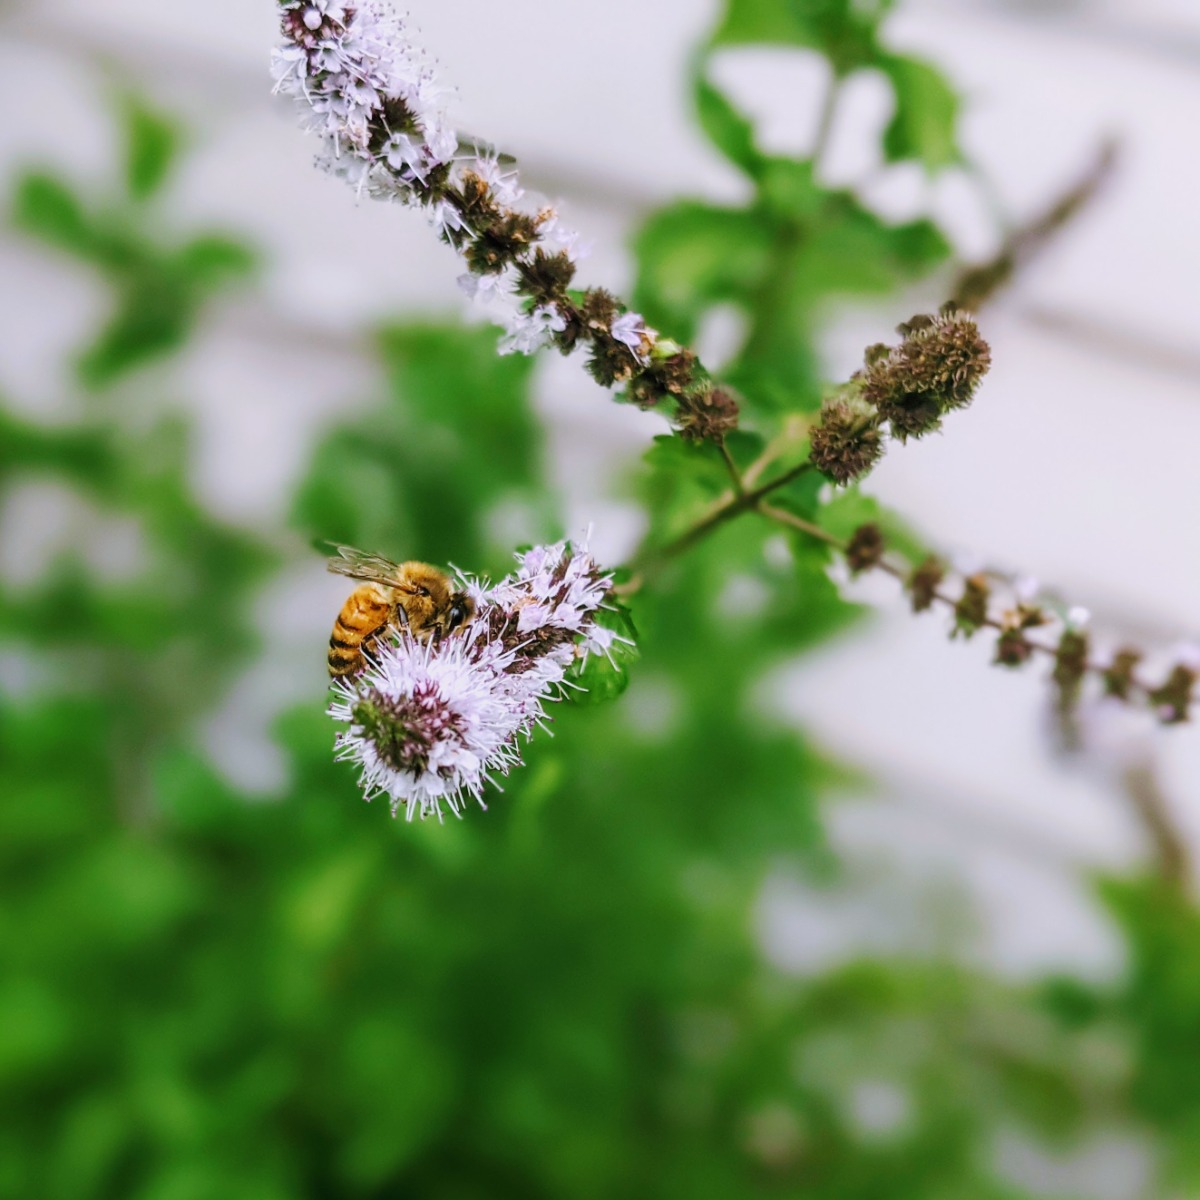 Bee Pollinator pollinating flowers on a peppermint plant in 2021